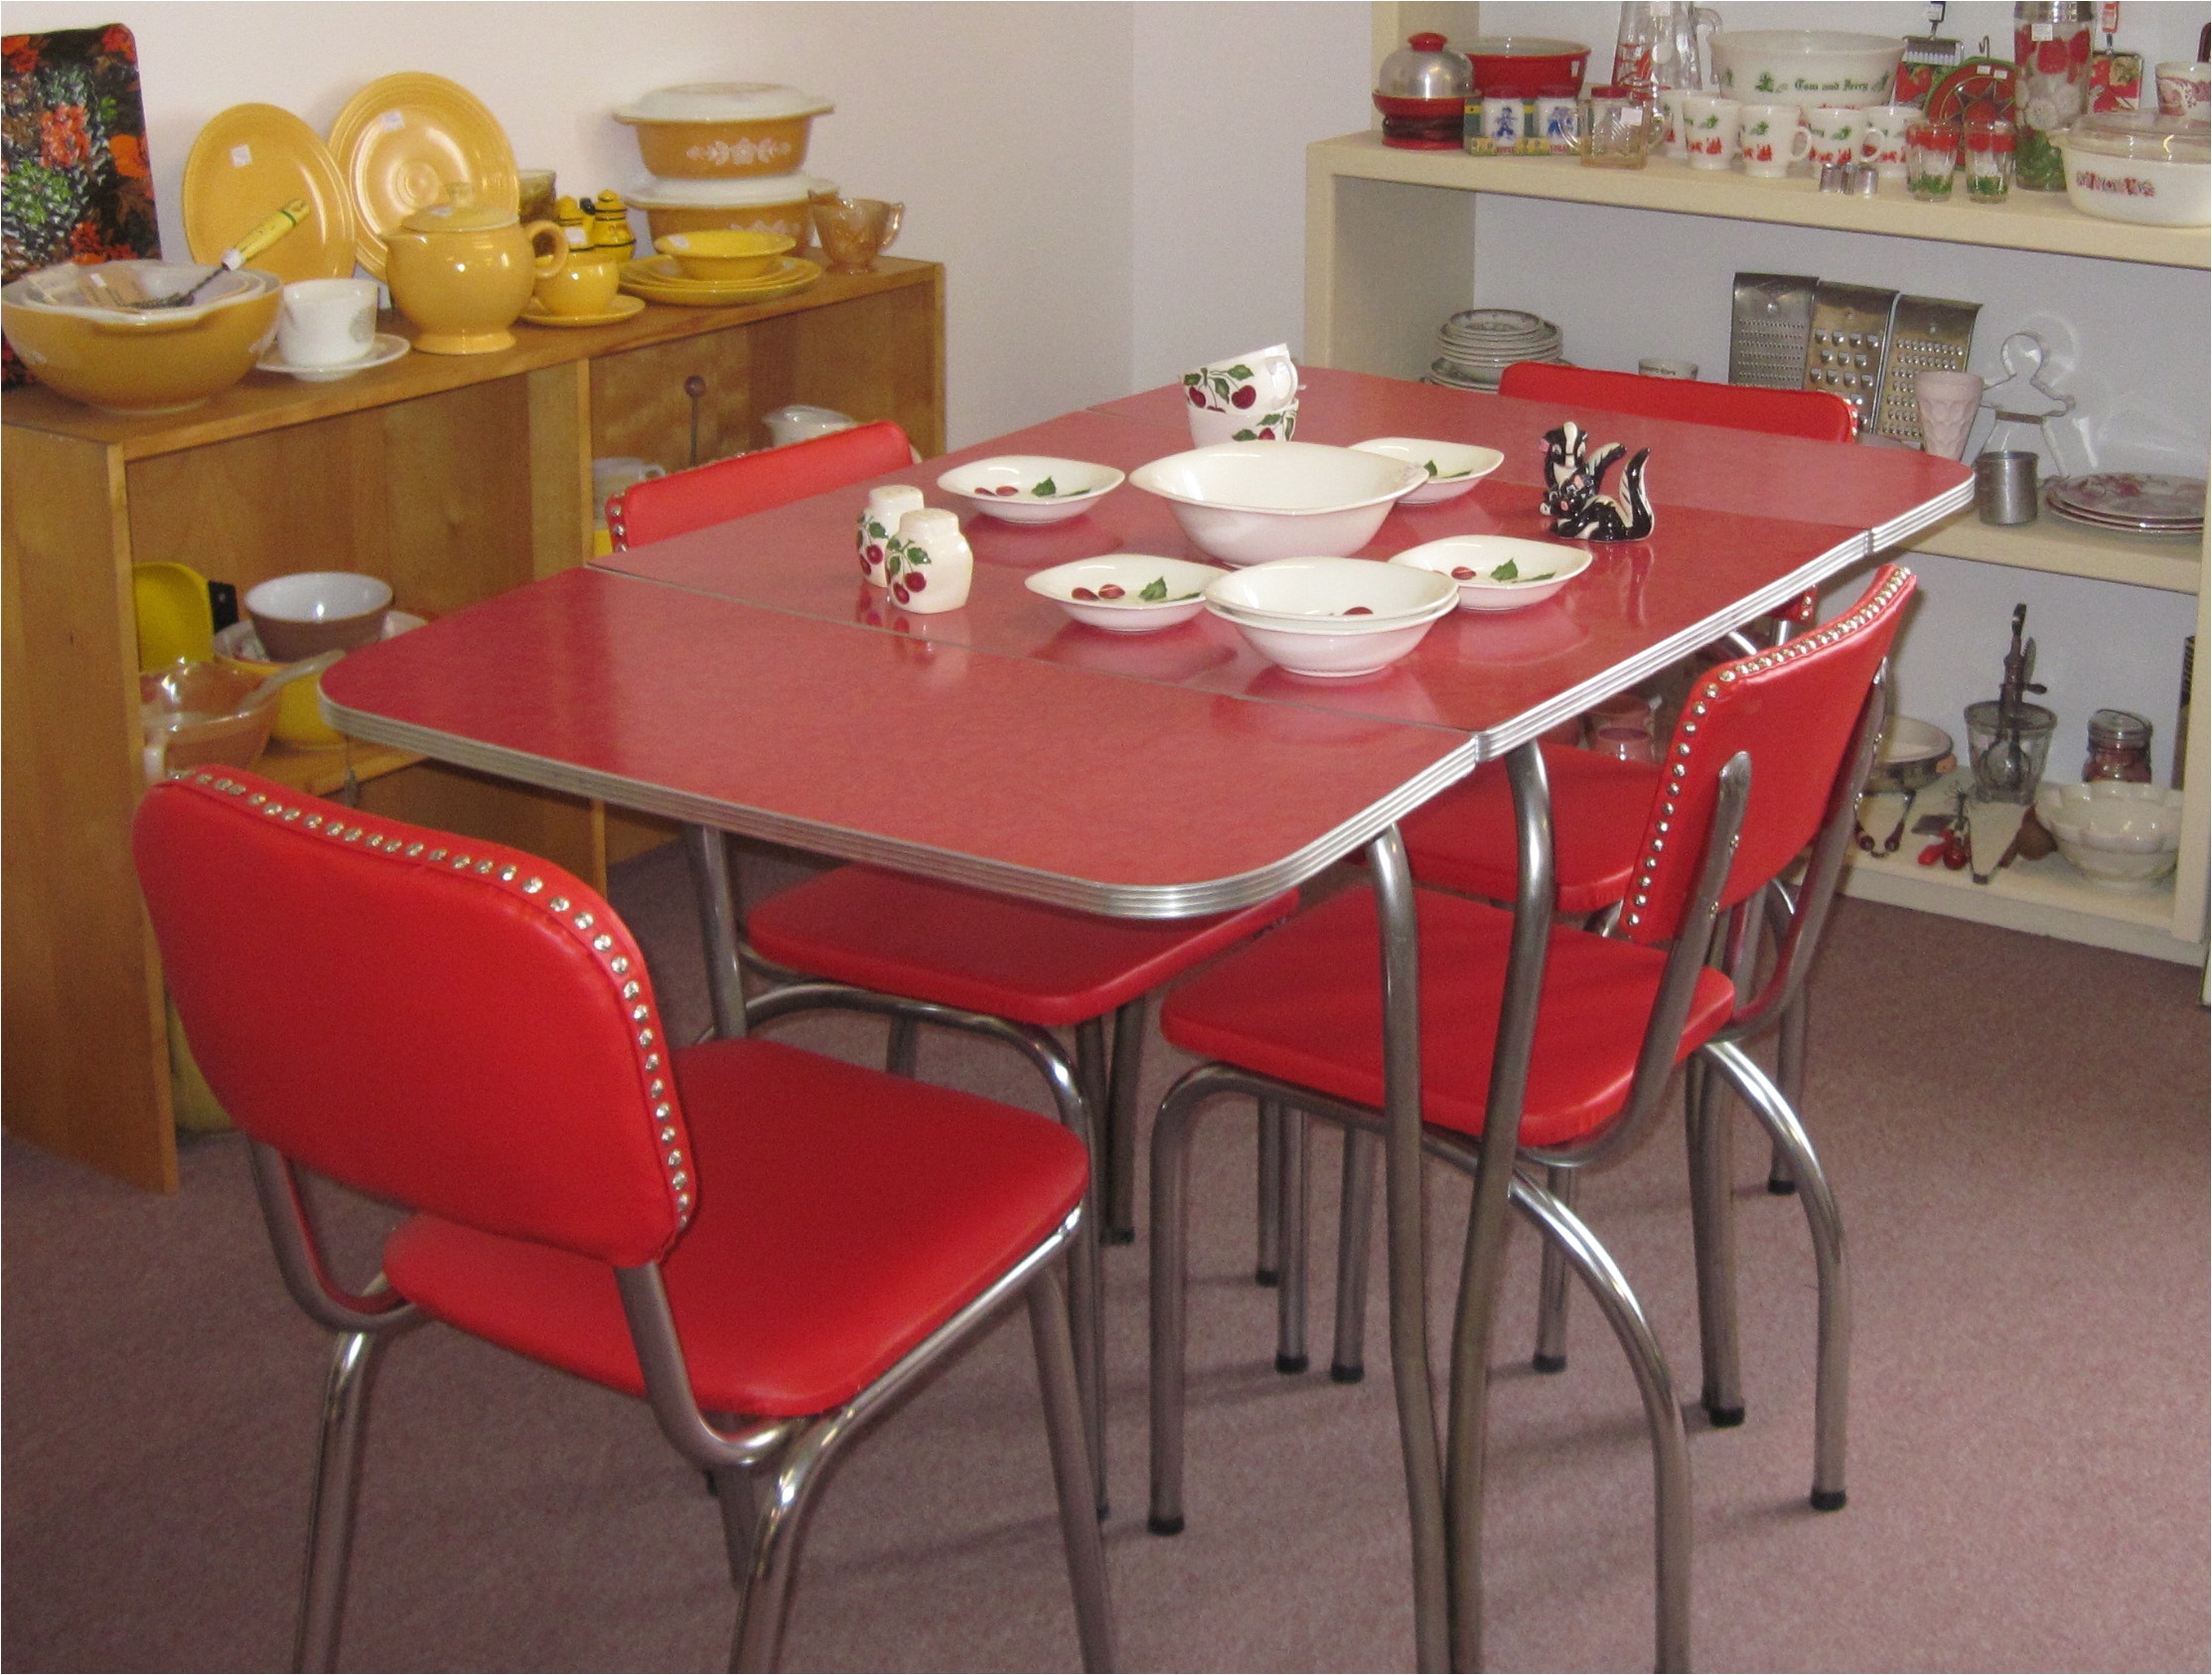 Formica Table and Chairs for Sale Uk Furniture Antique Kitchen Table and Chairs Kichen Booth Anatb